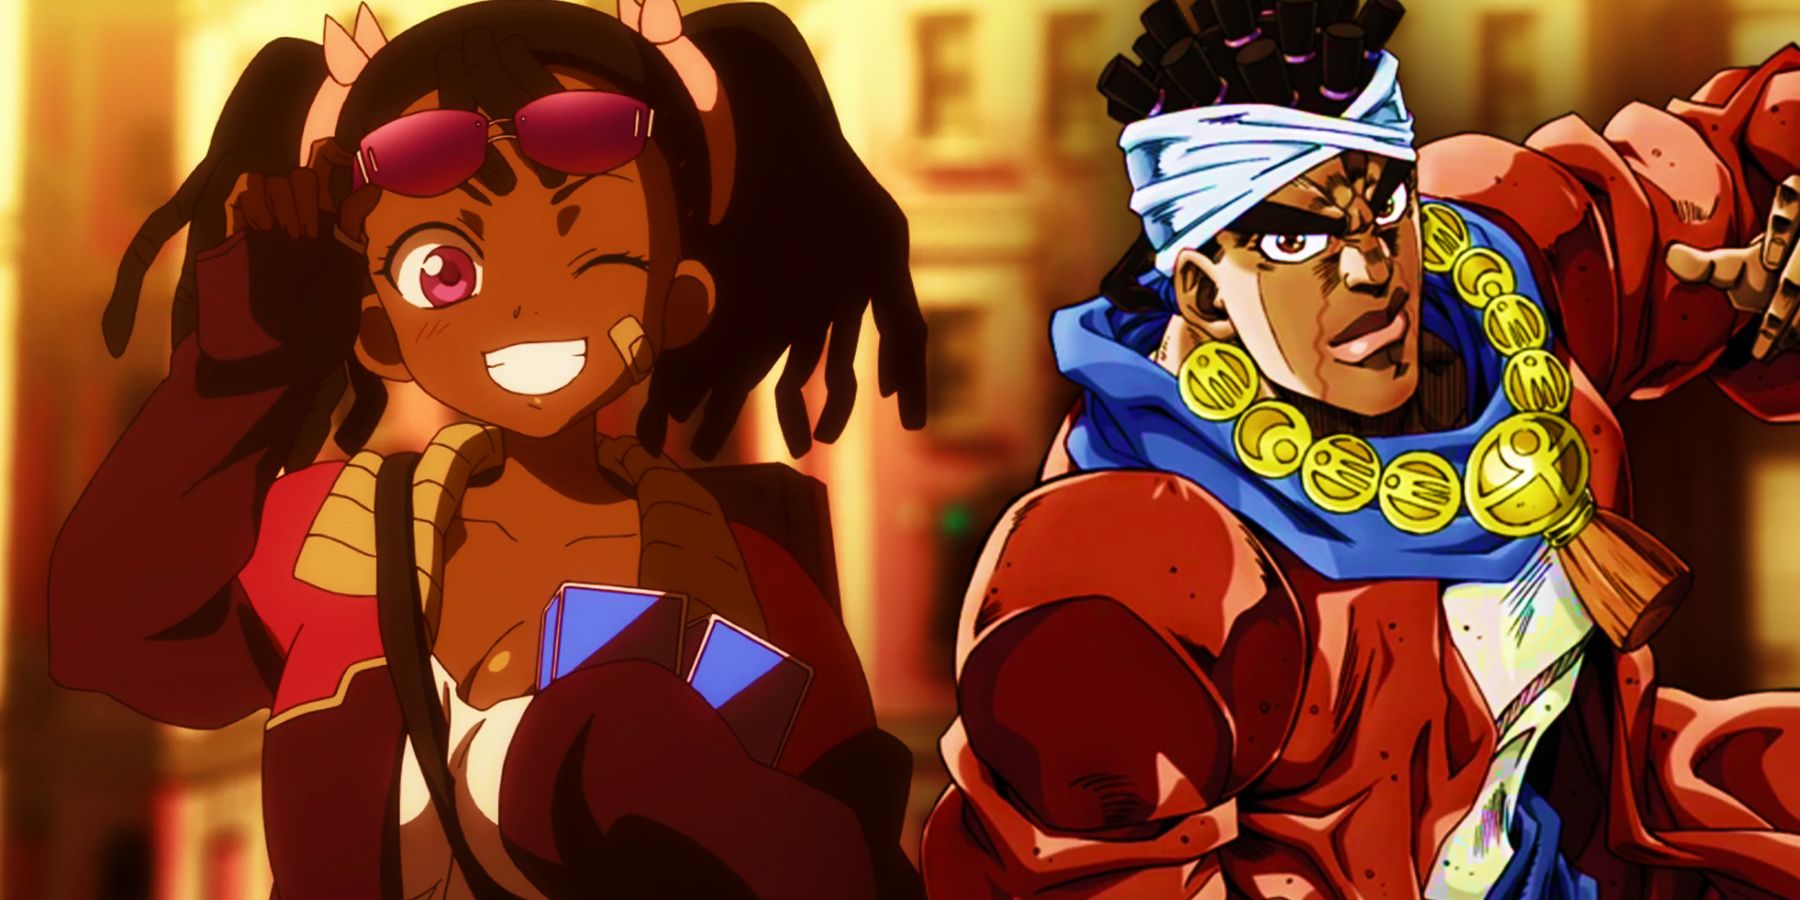 The Portrayal of Black People in Manga and Anime | JAPANsociology